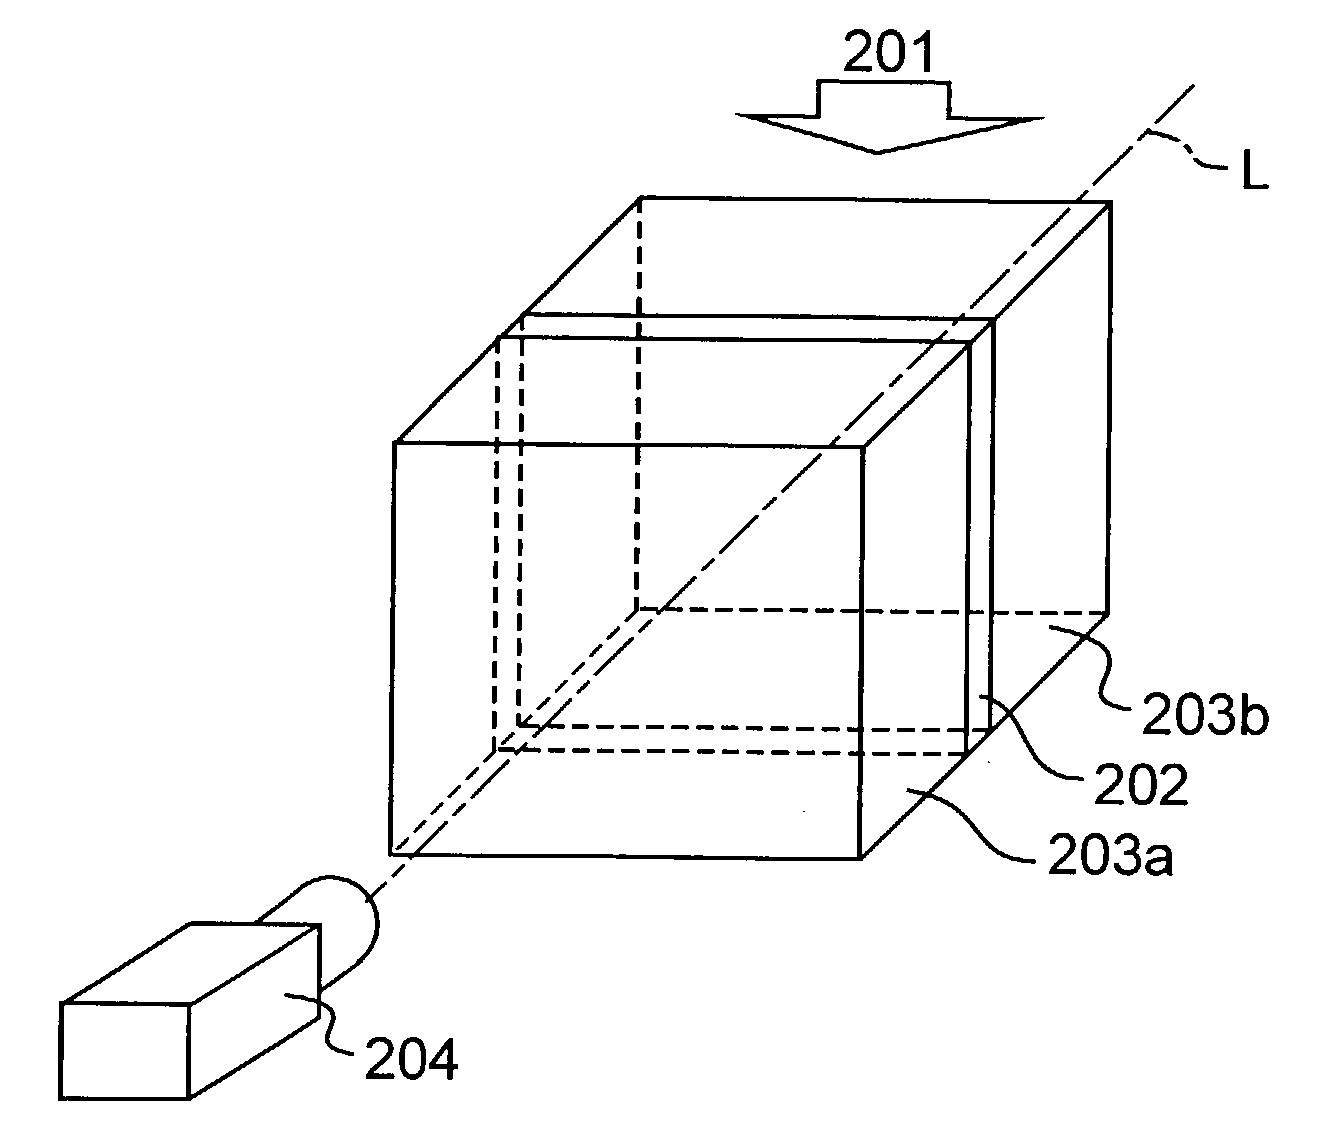 Apparatus for measuring absorption dose distribution